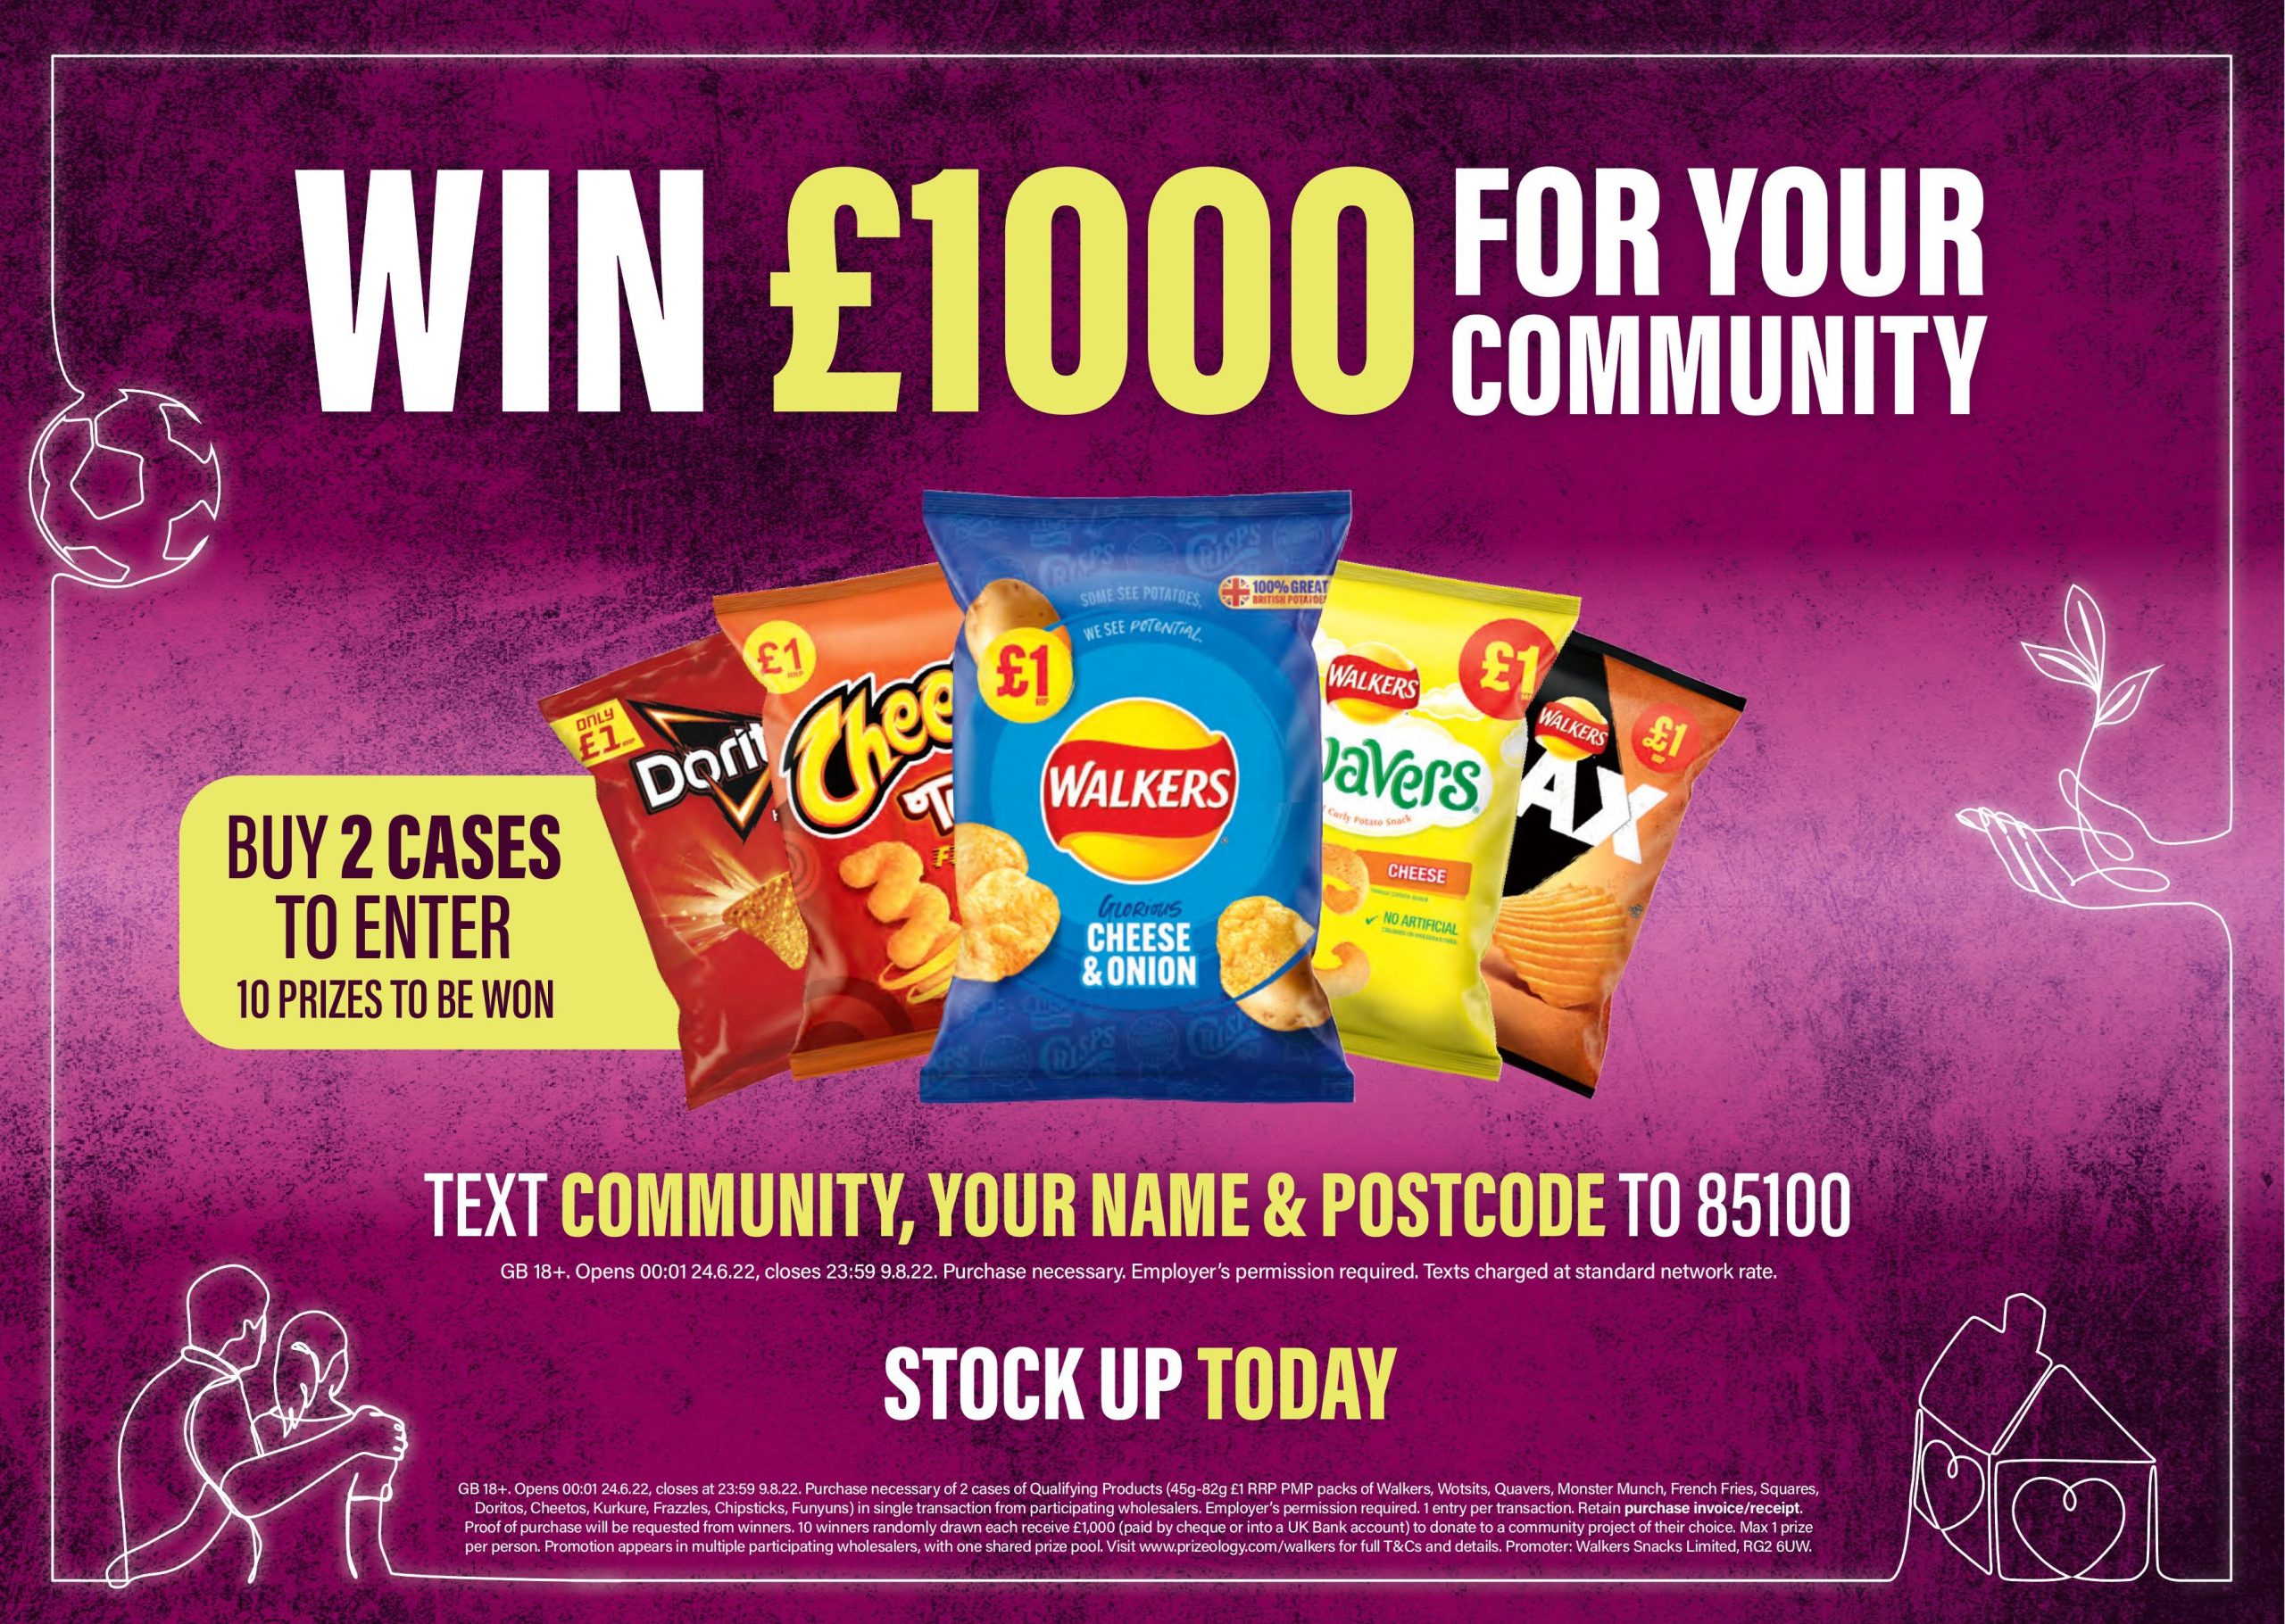 Walkers launches community prize fund competition to support retailers